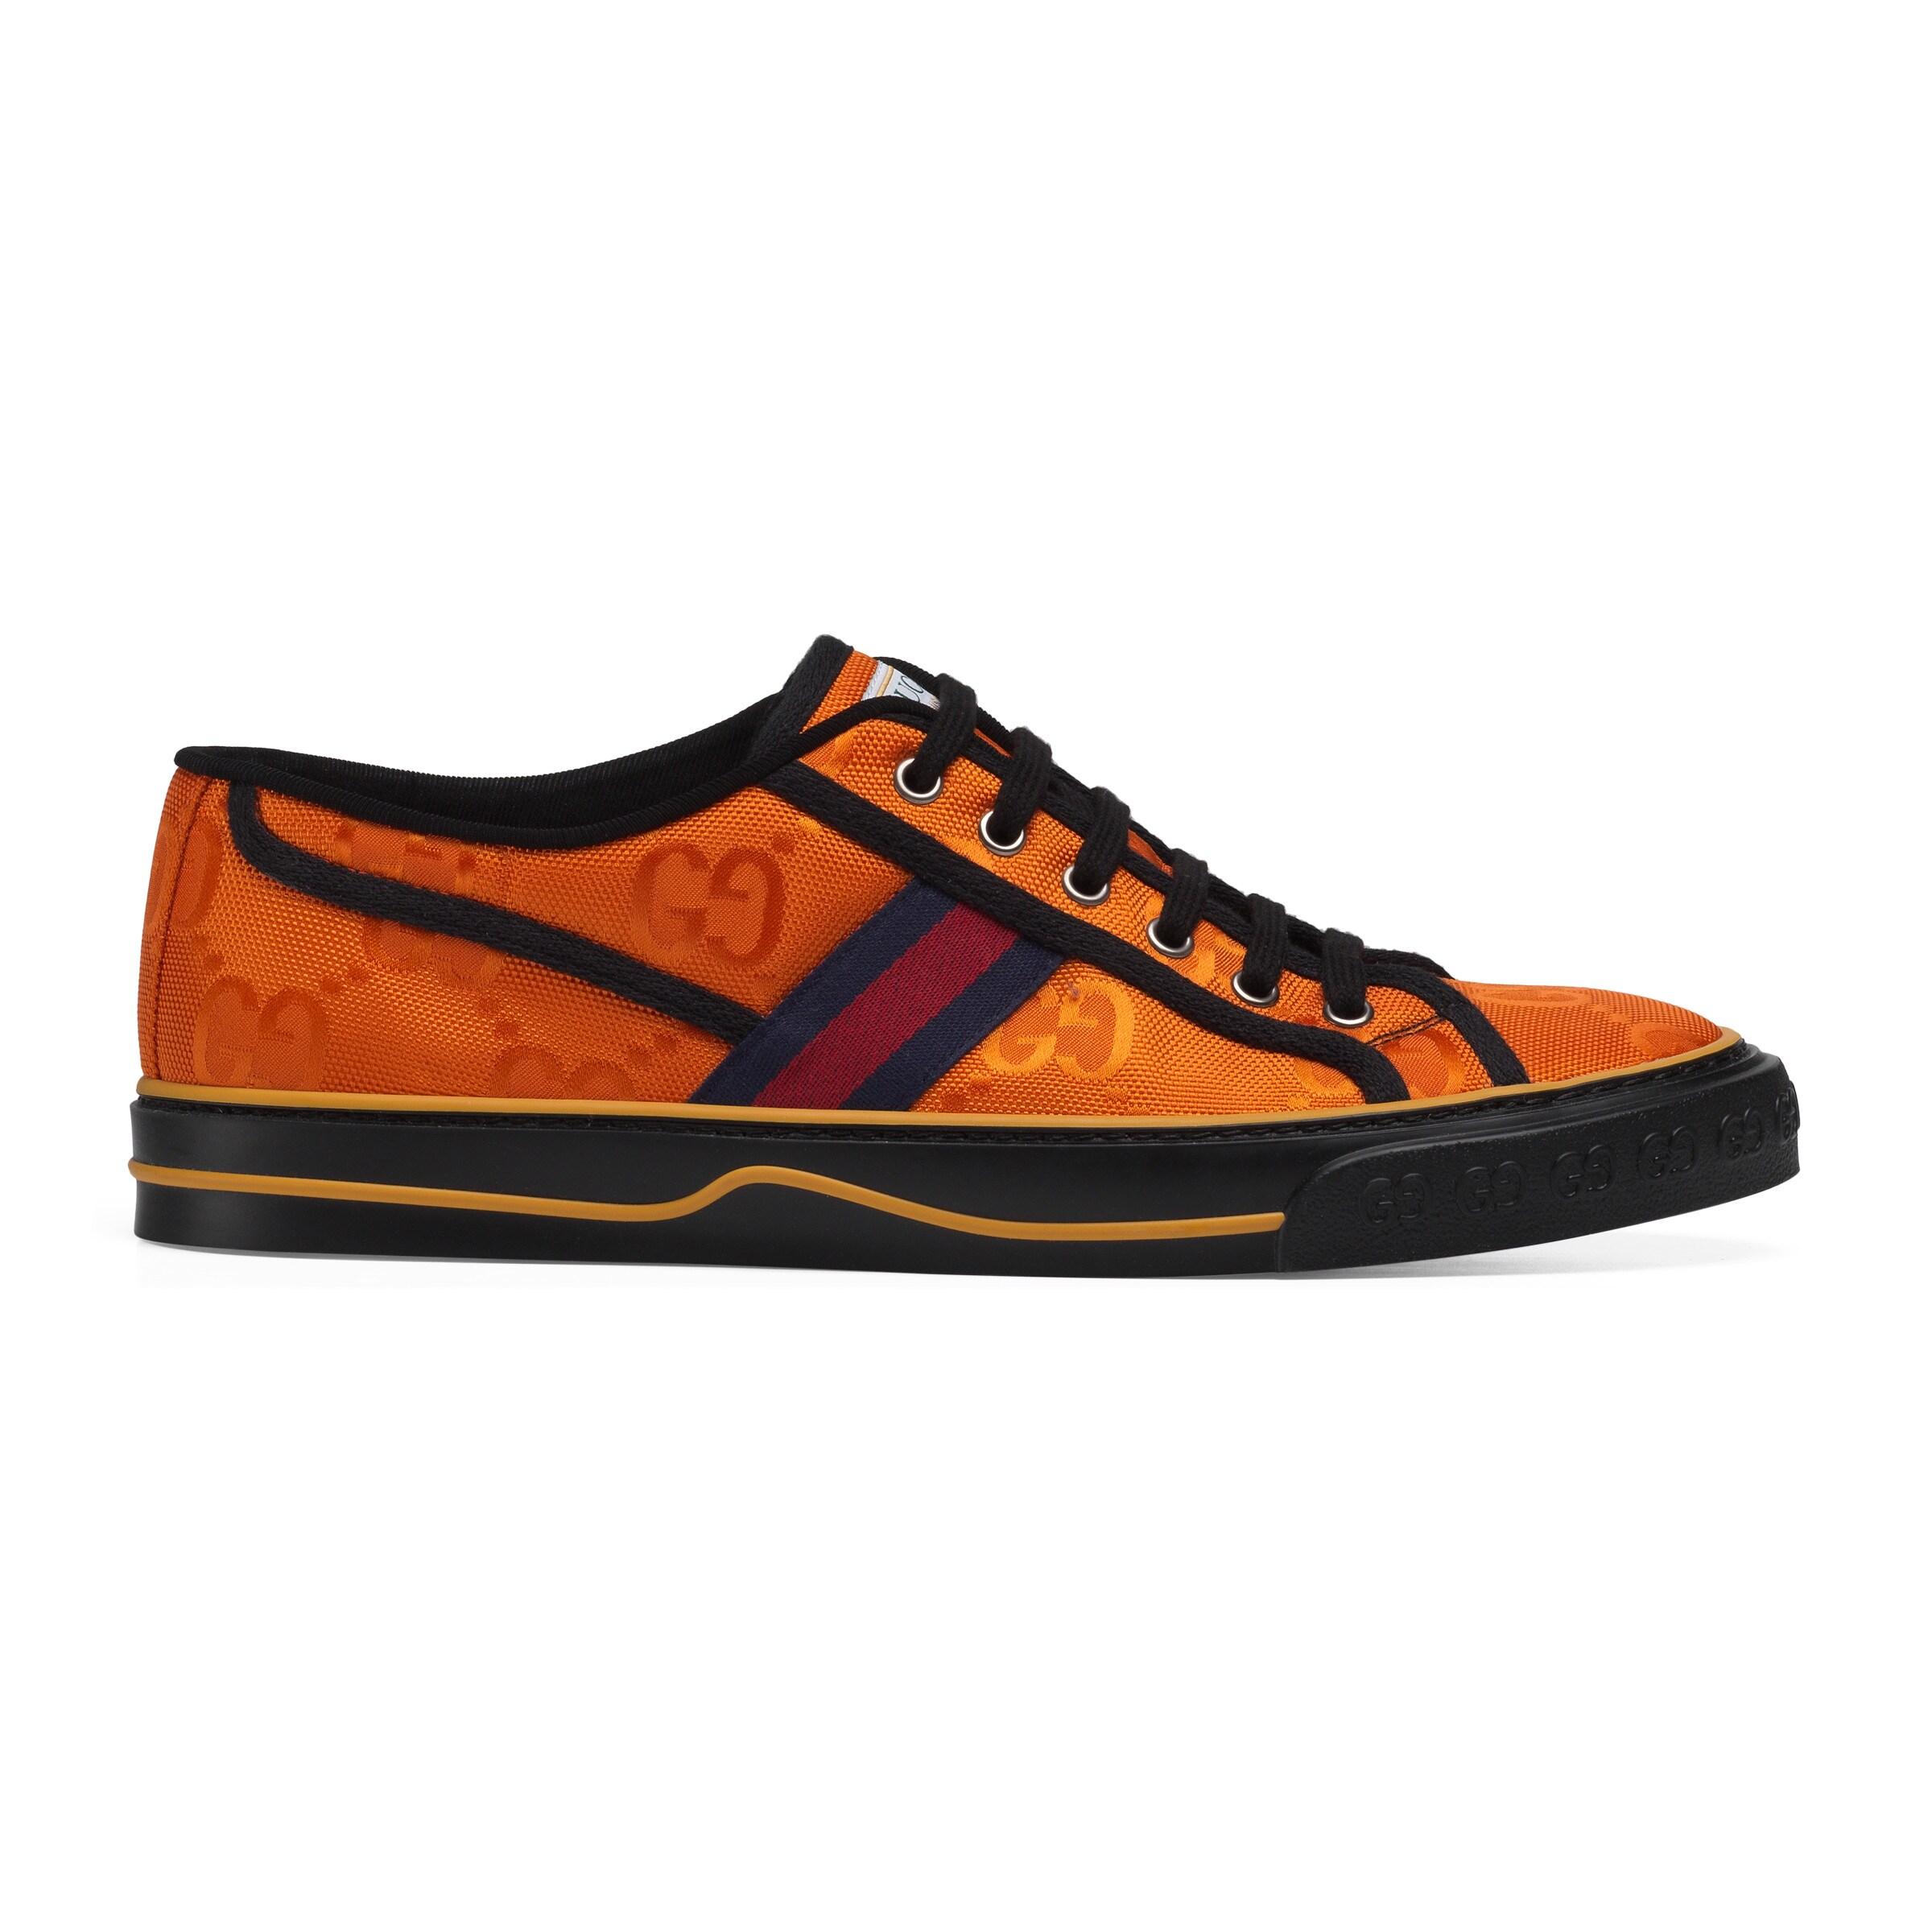 Gucci Synthetic Off The Grid Sneaker in Orange for Men - Lyst